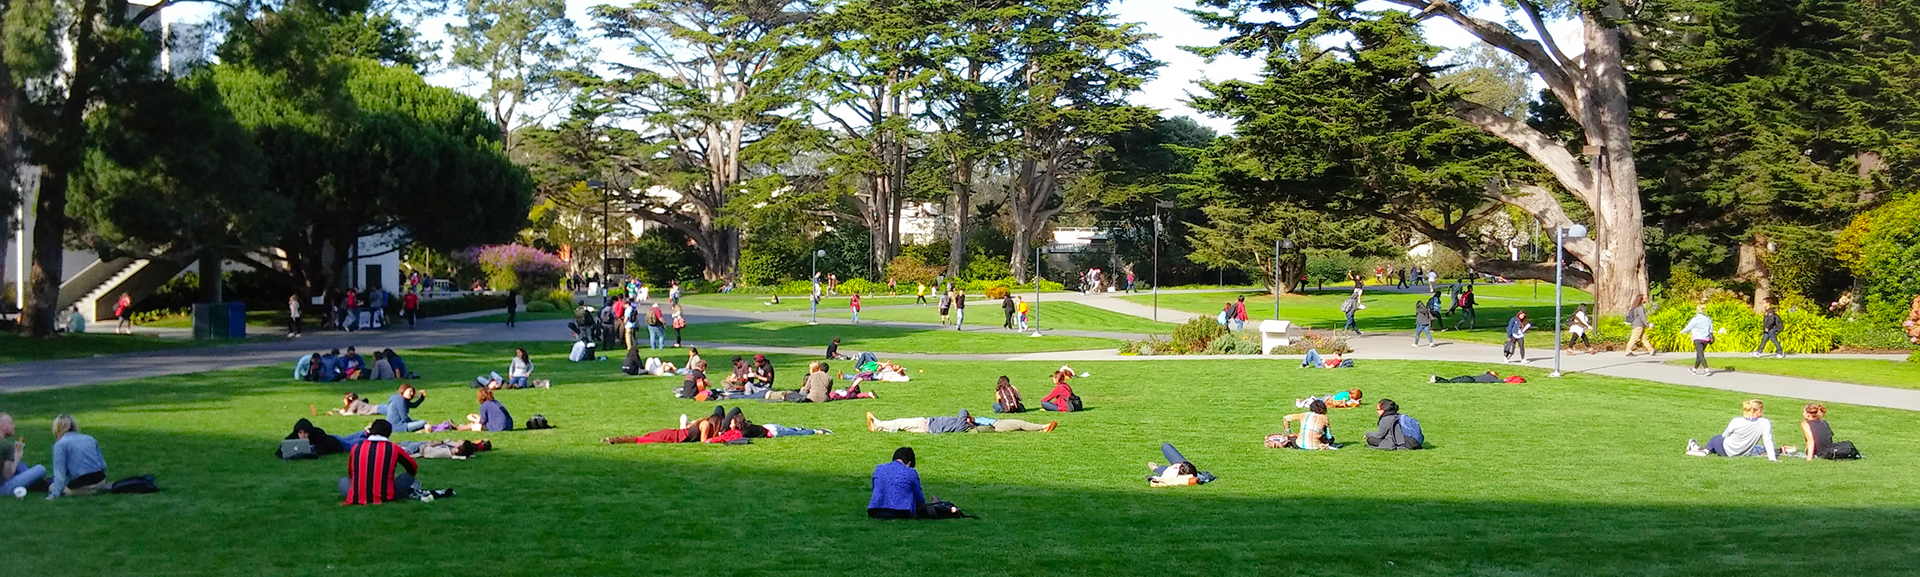 San Francisco State University students sitting in campus quad in Fall